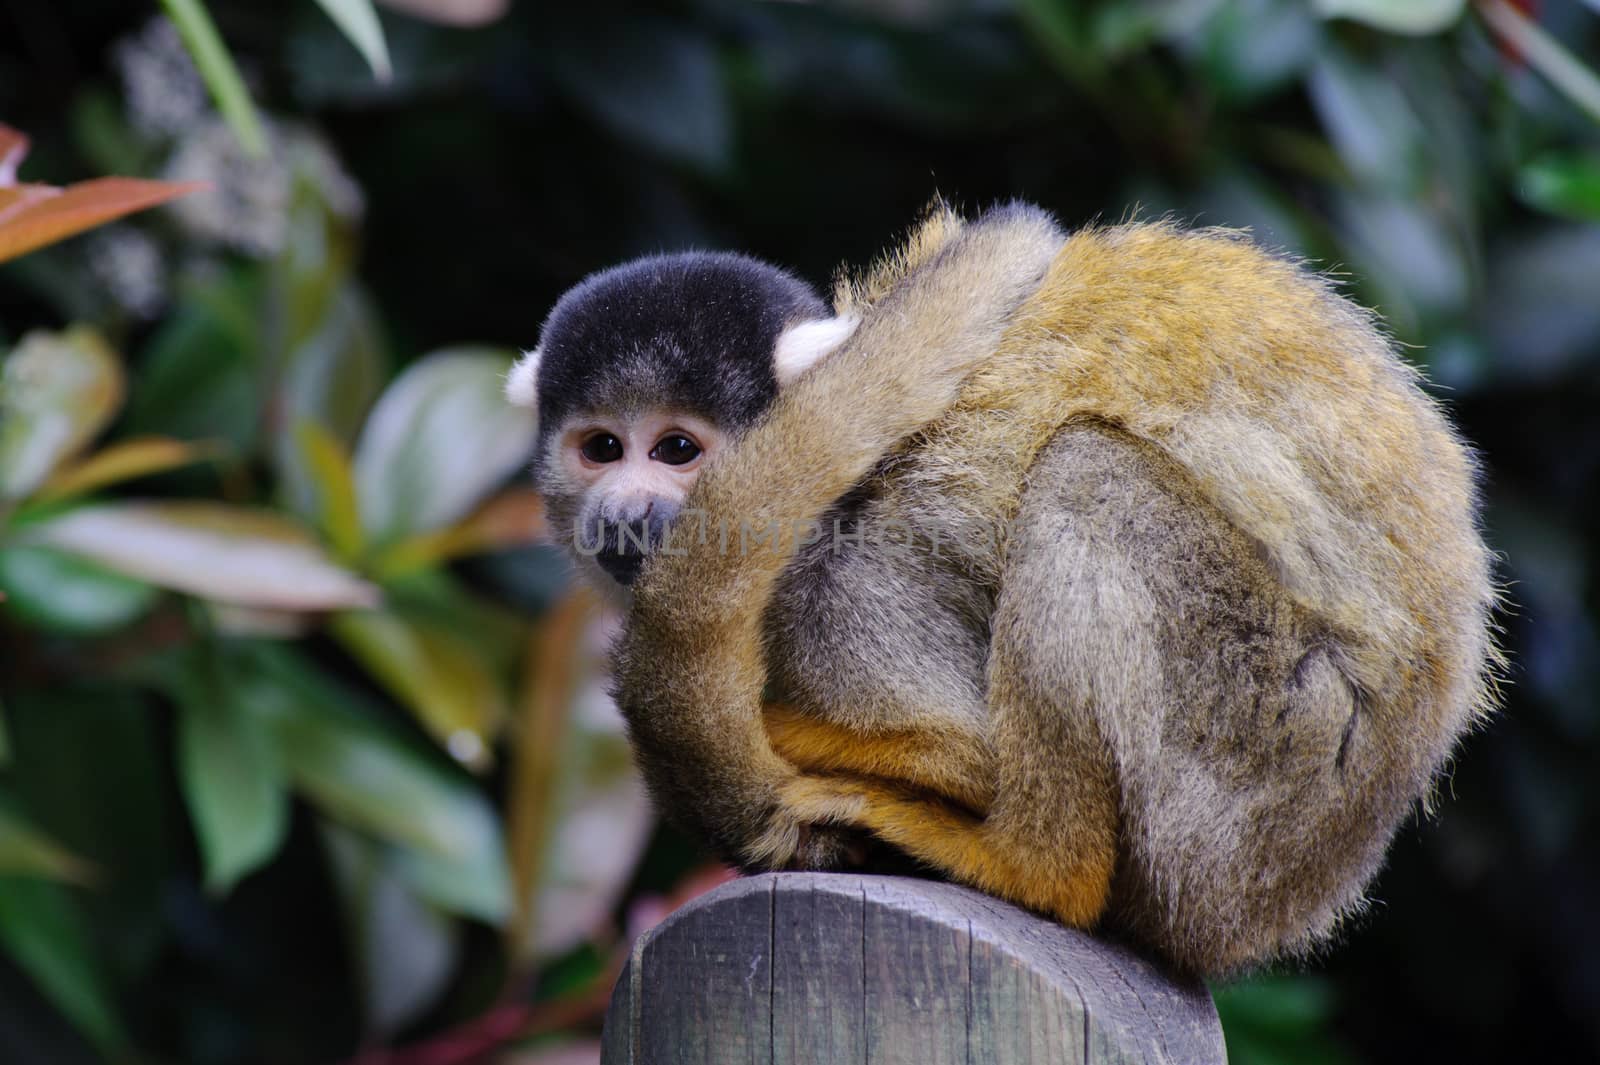 Squirrel monkey waiting and watching